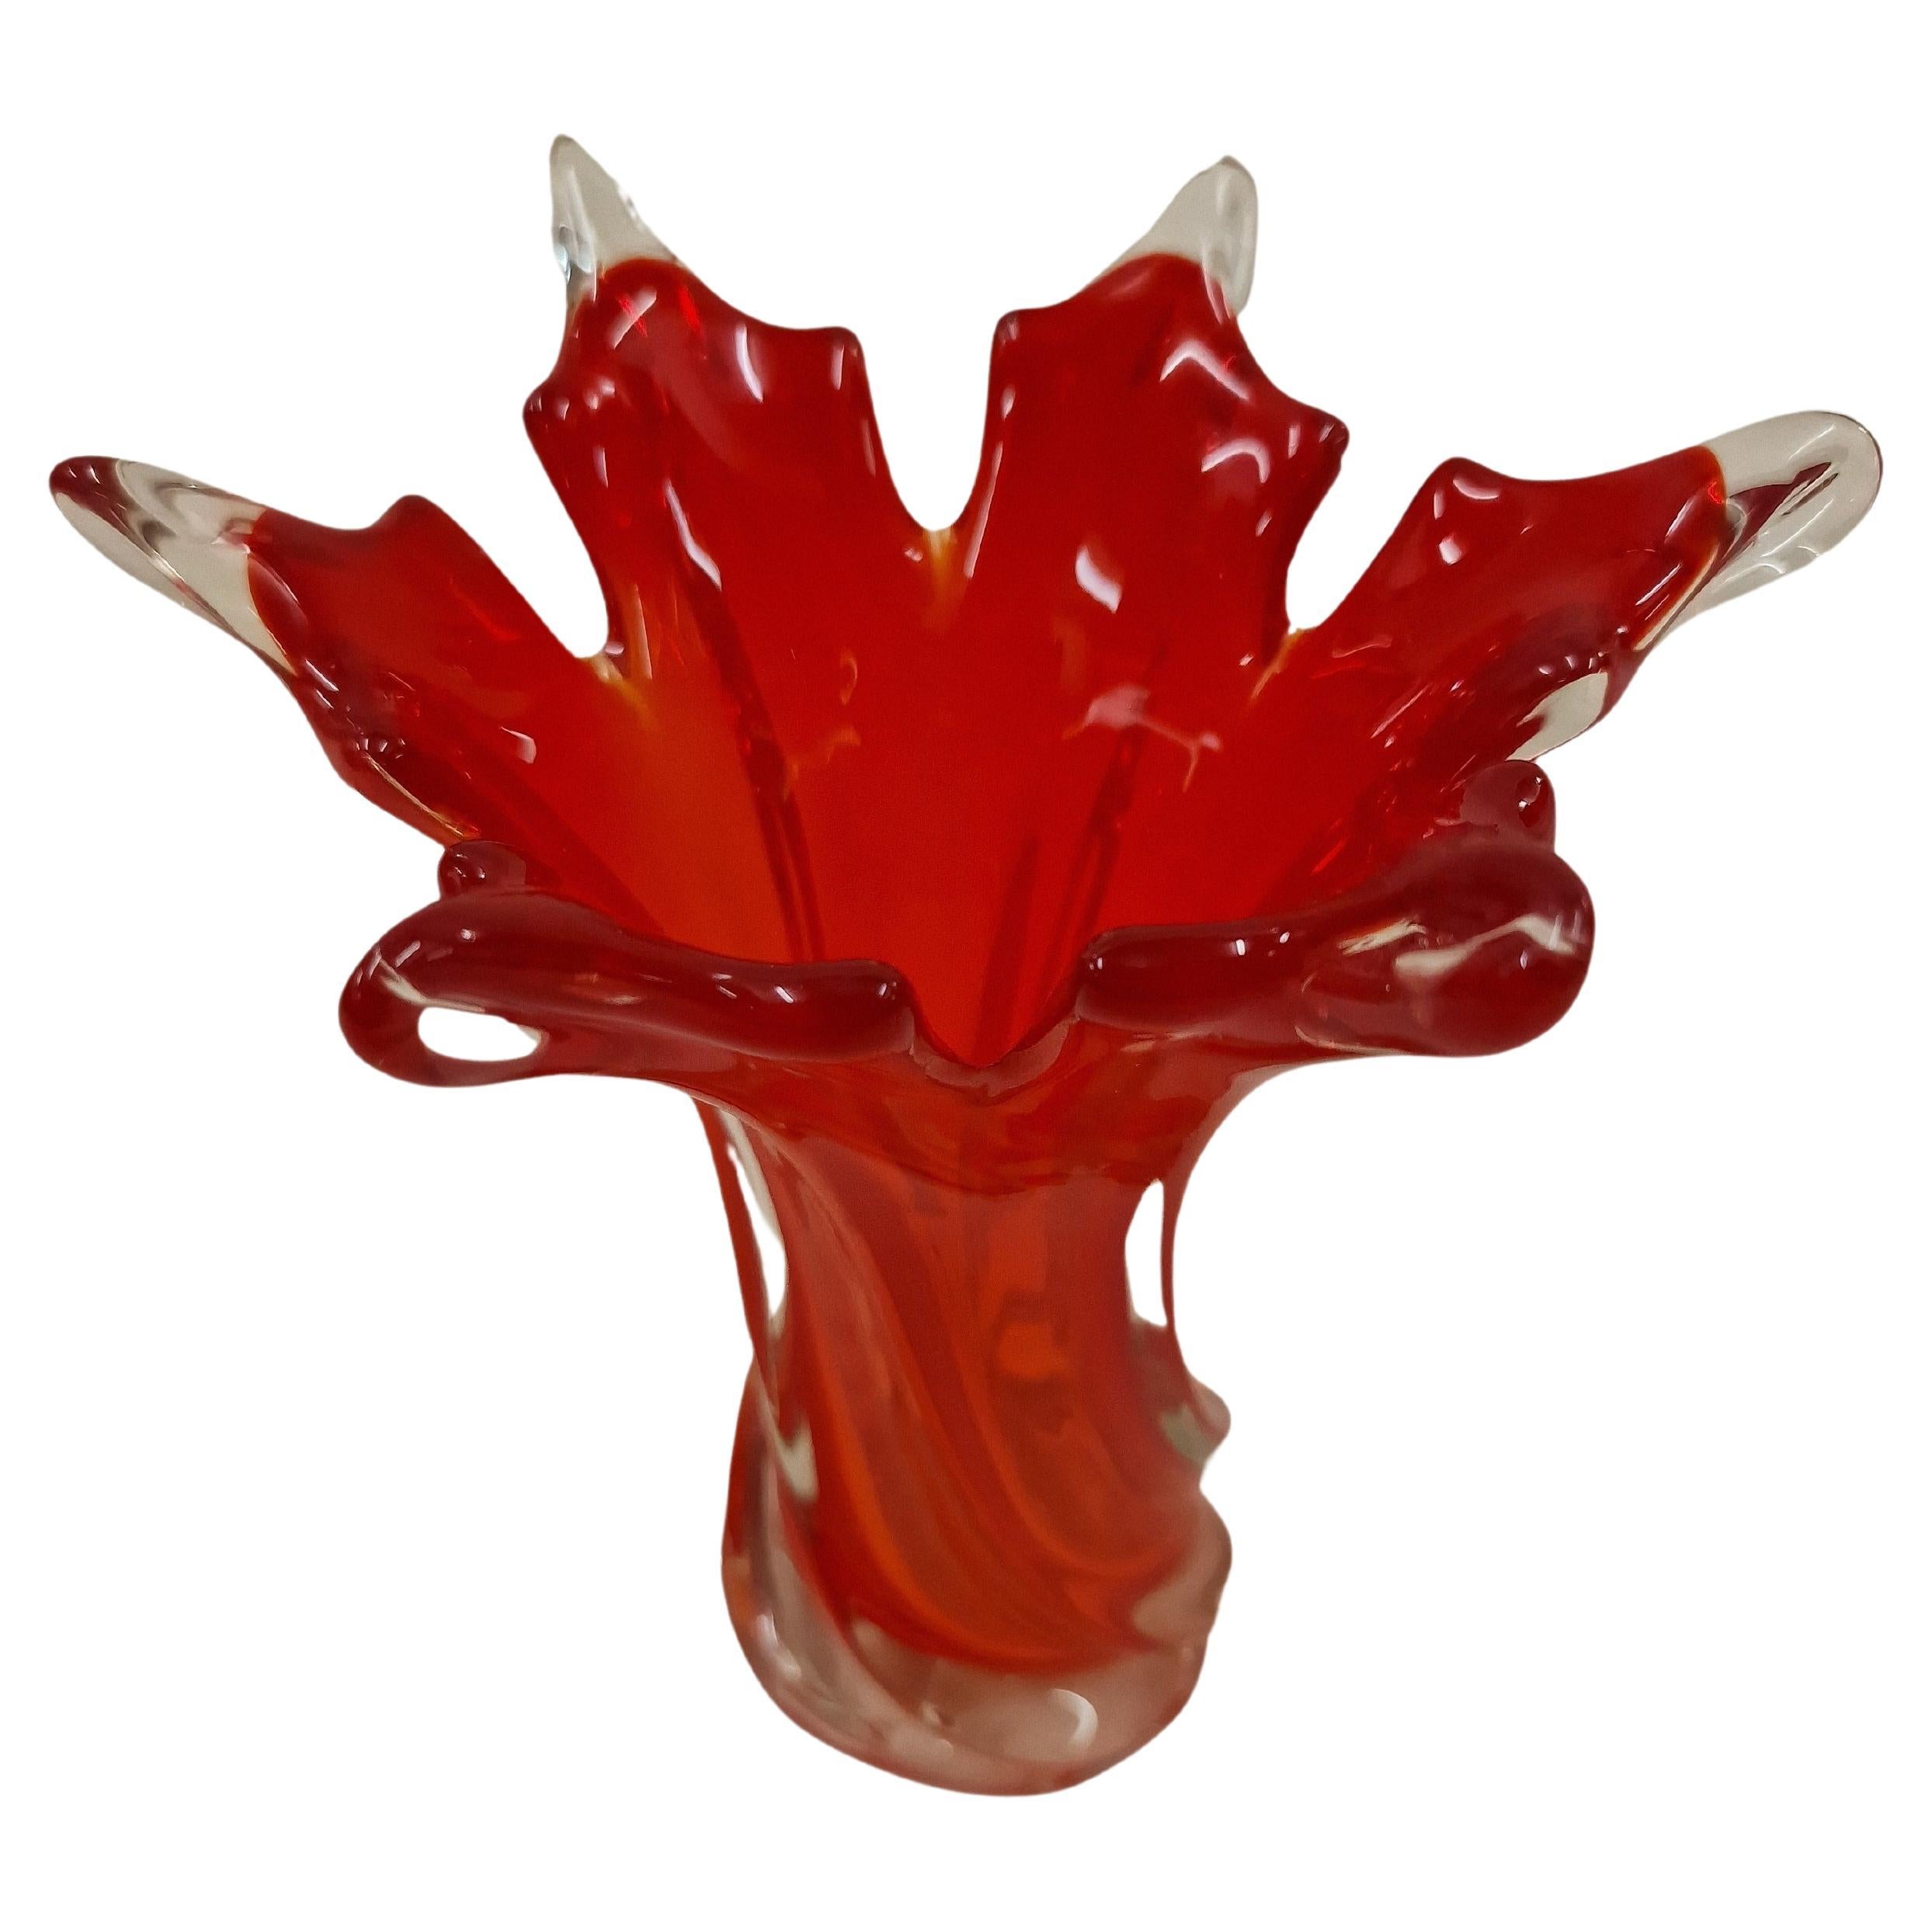 Very decorative star-shaped flower vase in a beautiful red colour, made in the famous center of art glass, mouth-blown glass, Murano, Venice, Italy, made in the 1970s. 

The vase has a wonderful shape - impressivly made, high craftmenship. The